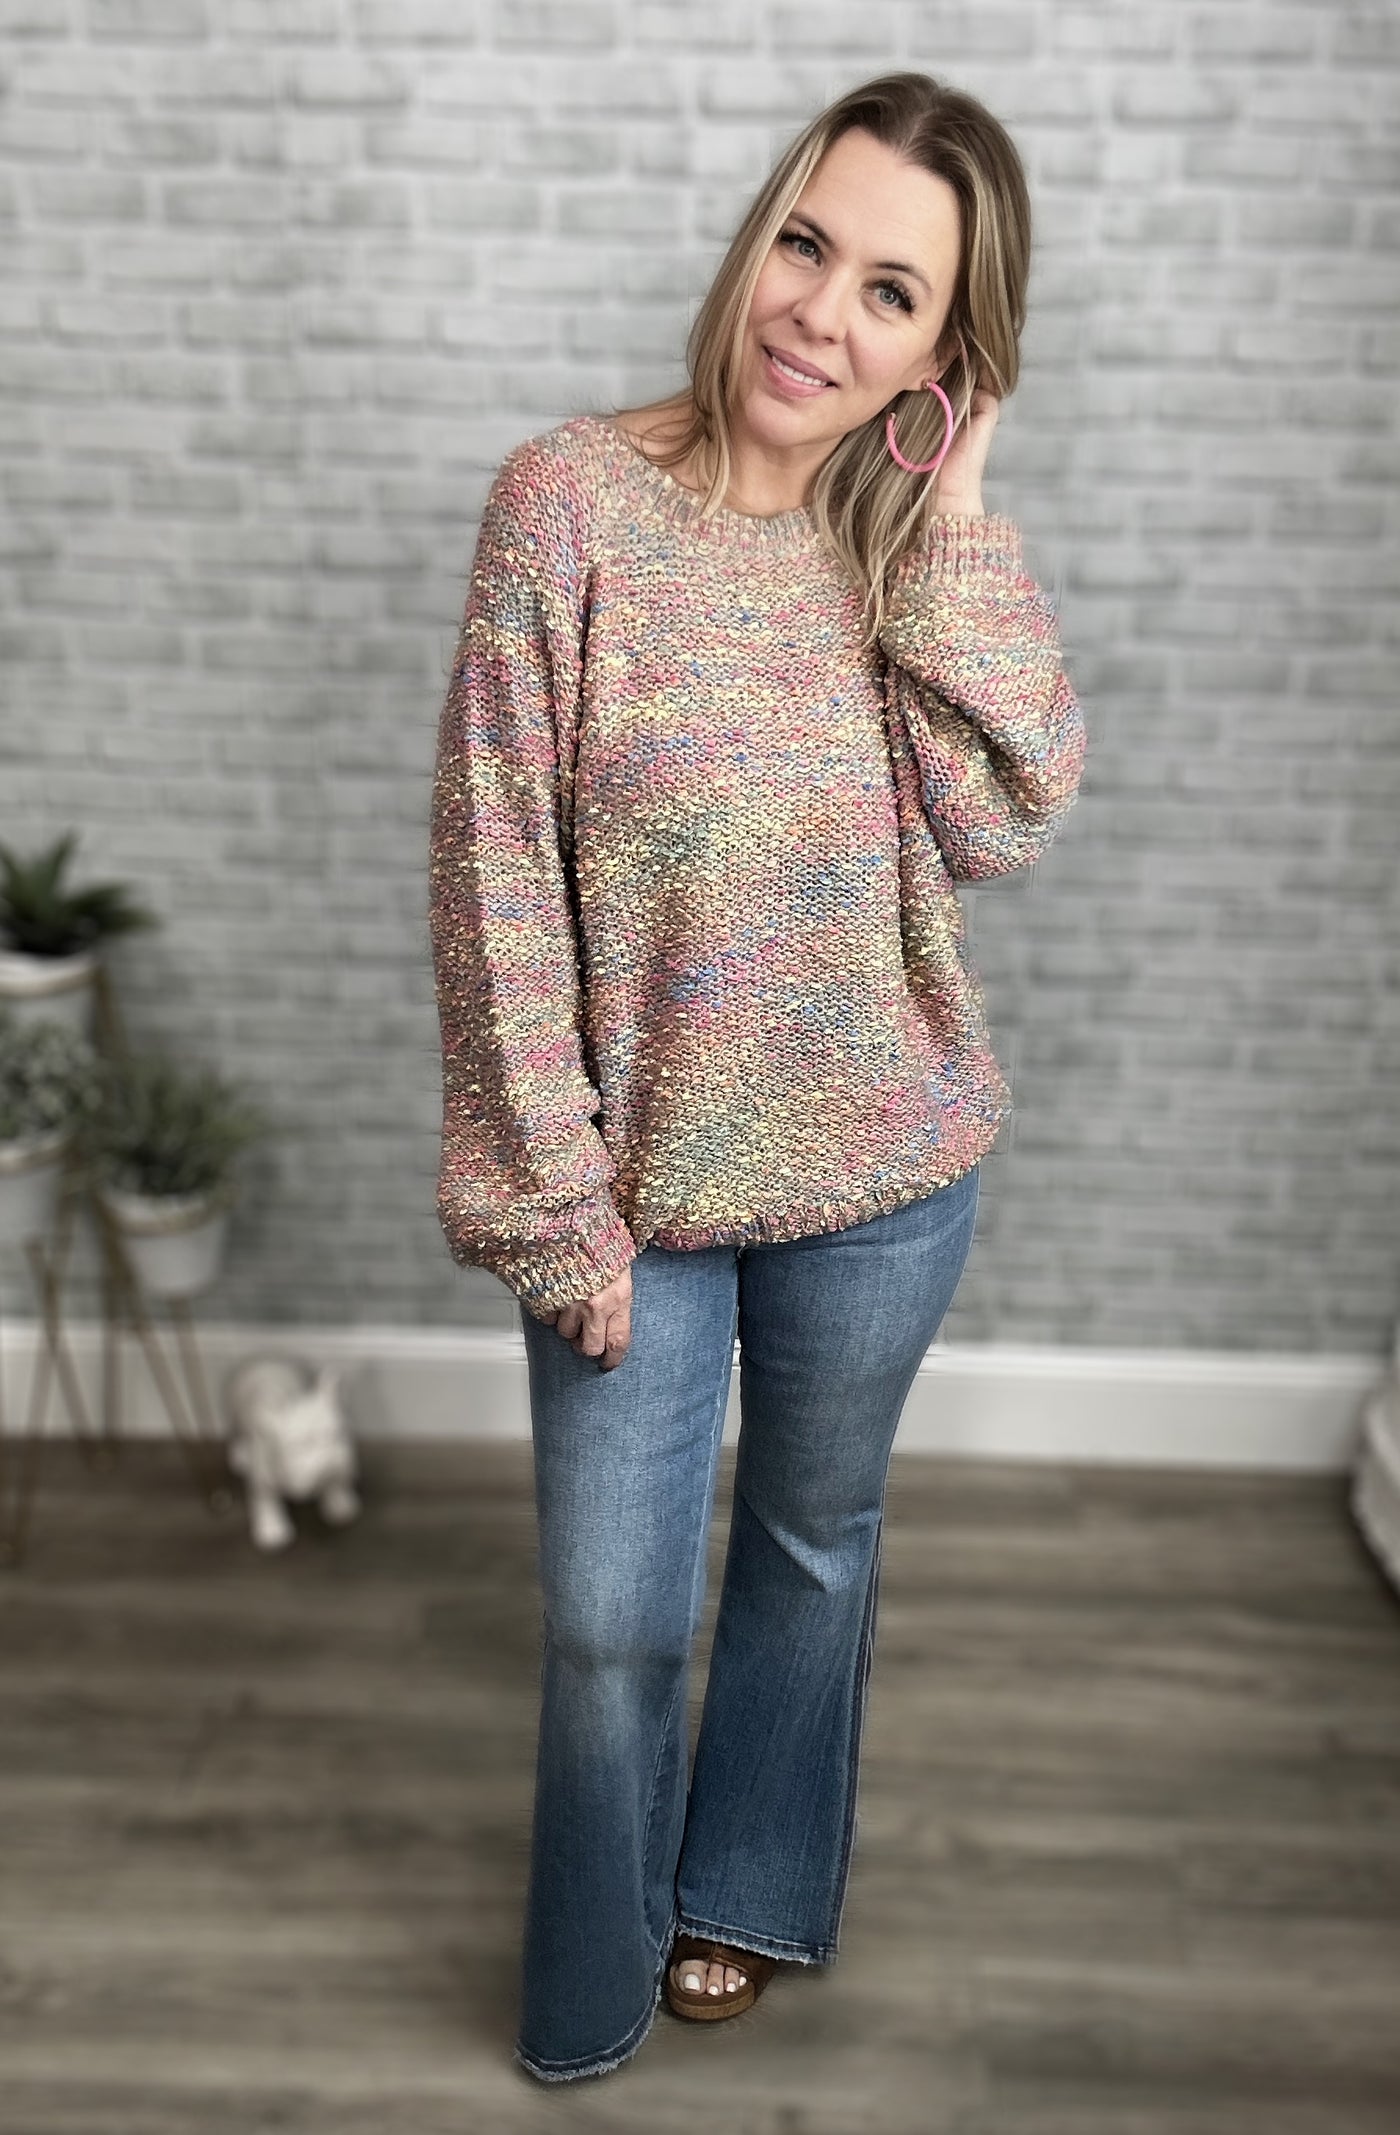 Colorful Textured Sweater by First Love